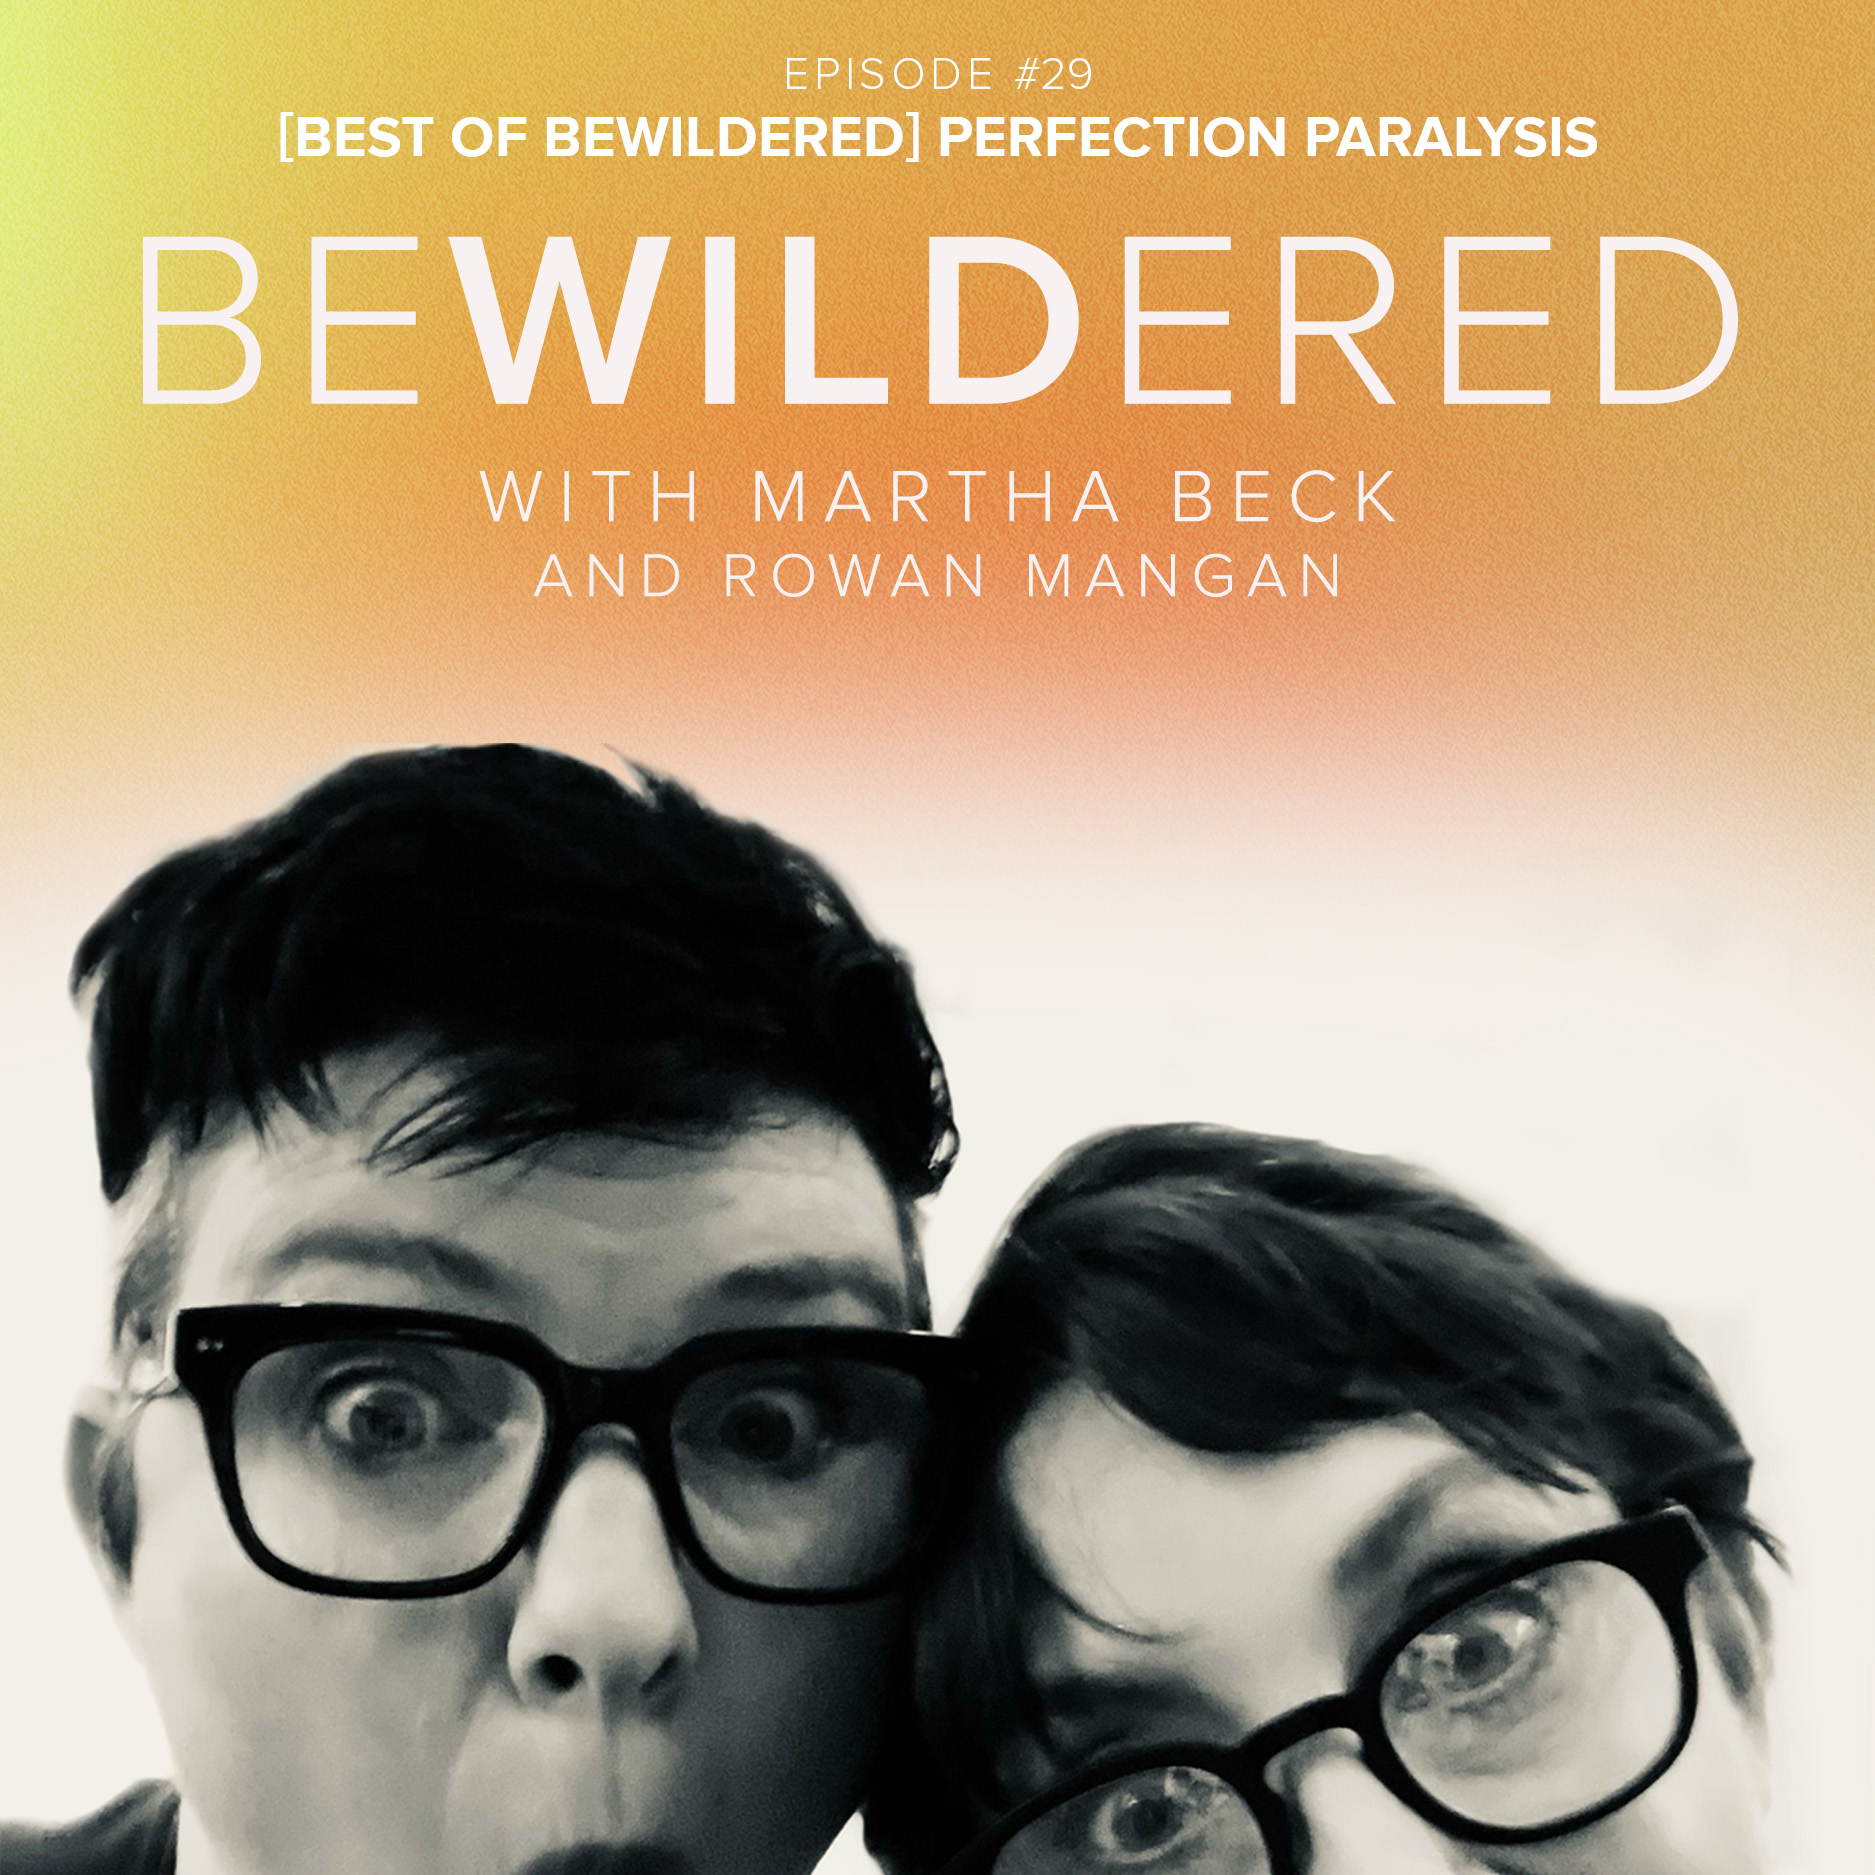 Image for Episode #29 [Best of Bewildered] Perfection Paralysis for the Bewildered Podcast with Martha Beck and Rowan Mangan